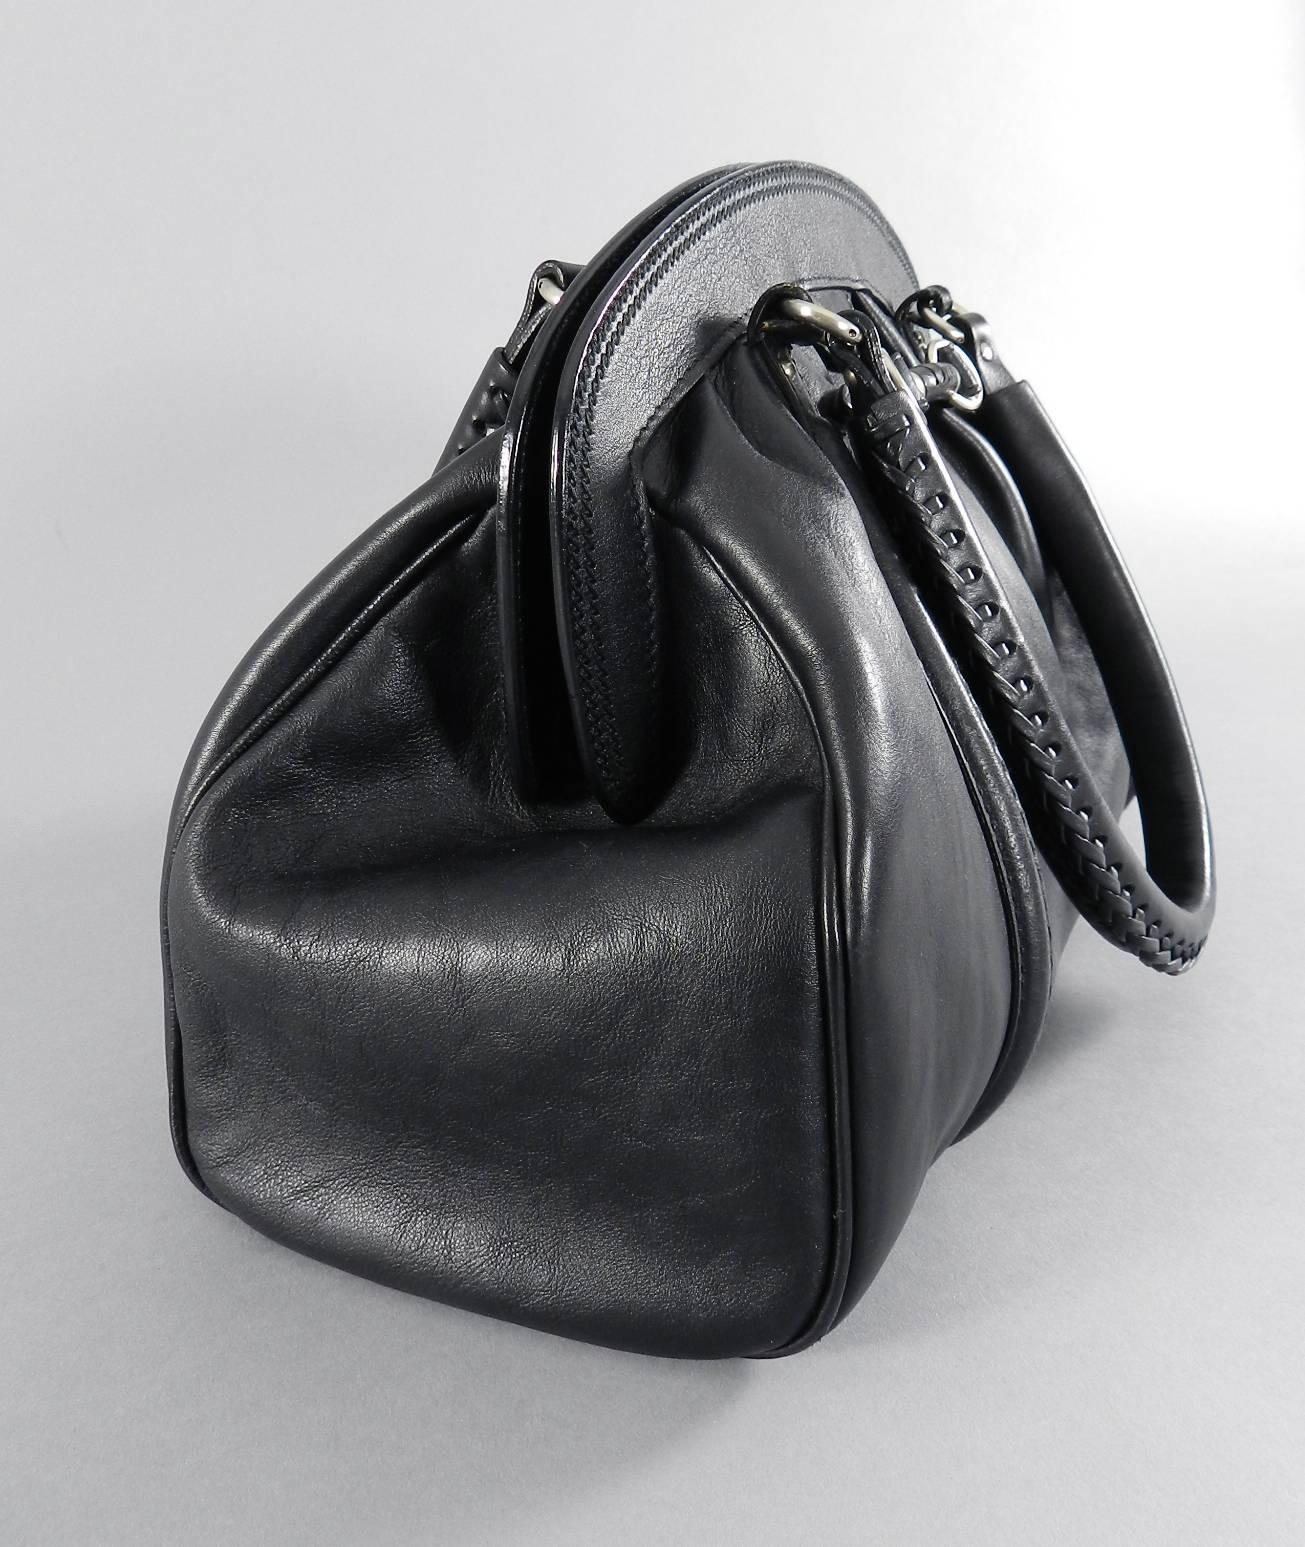 Christian Dior Black Handbag with Braided Handles In Excellent Condition For Sale In Toronto, ON